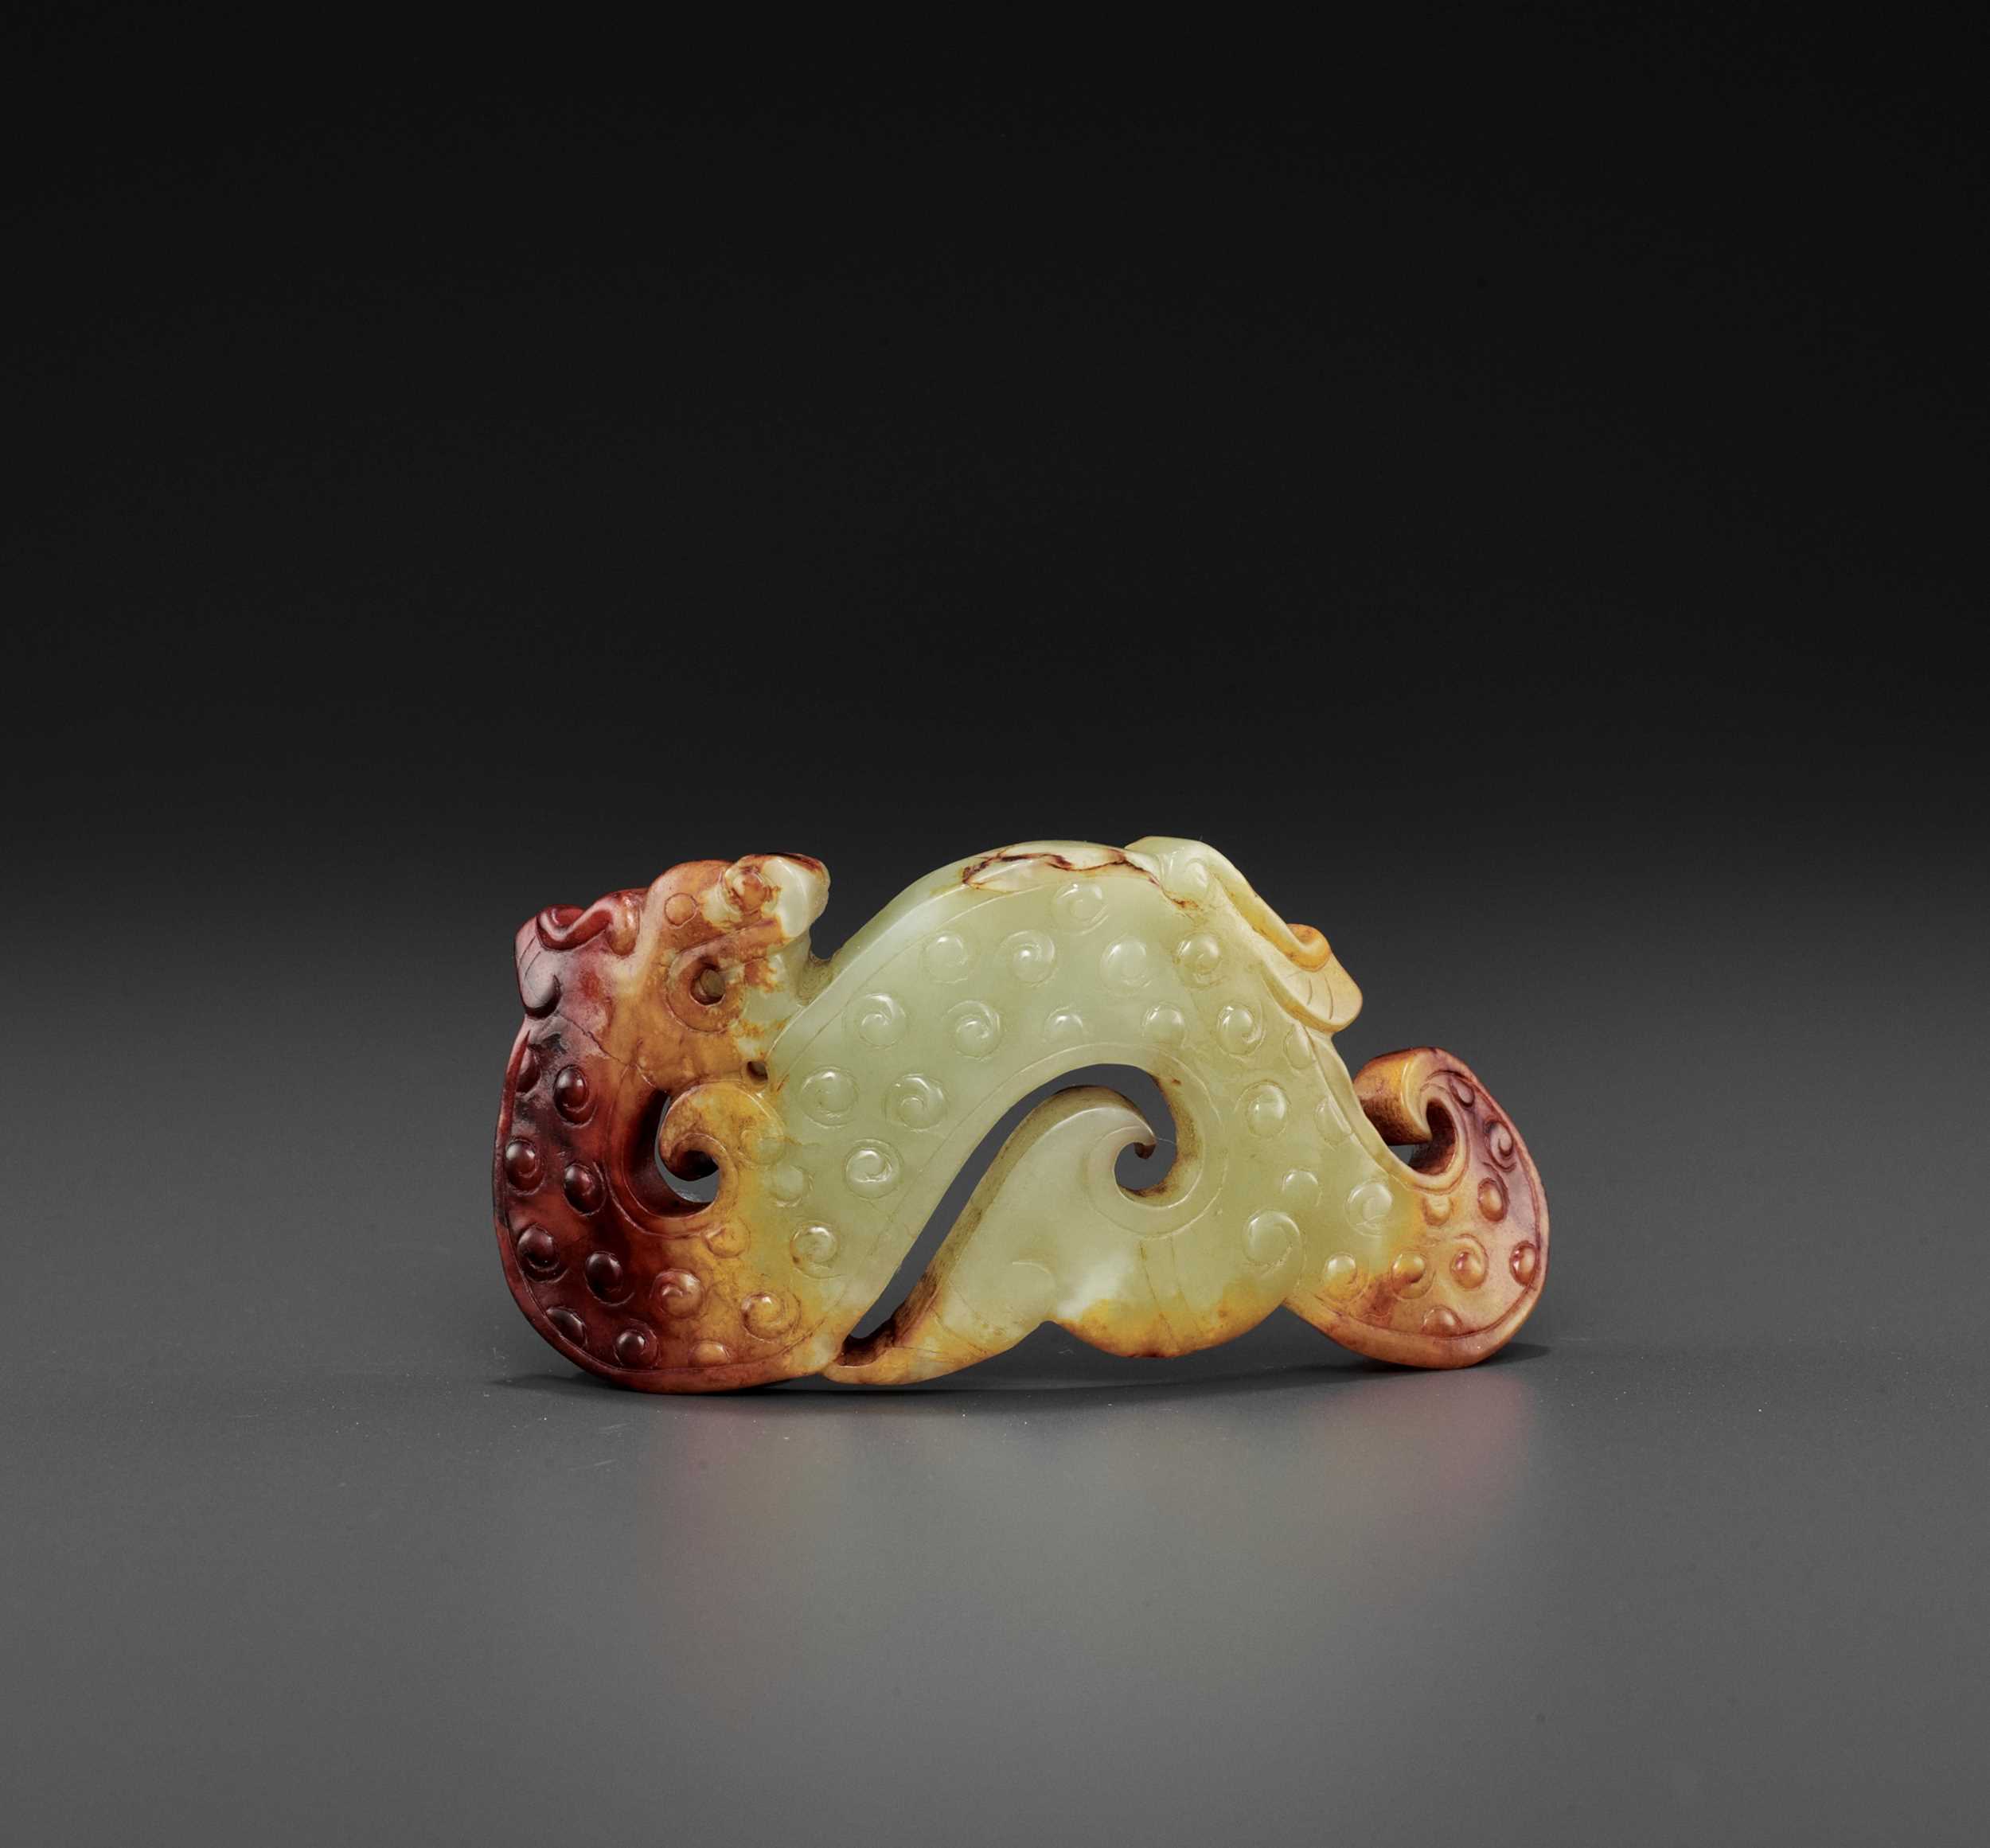 Lot 76 - A YELLOW AND RUSSET JADE ‘ARCHAISTIC’ WRIST ORNAMENT, SONG DYNASTY